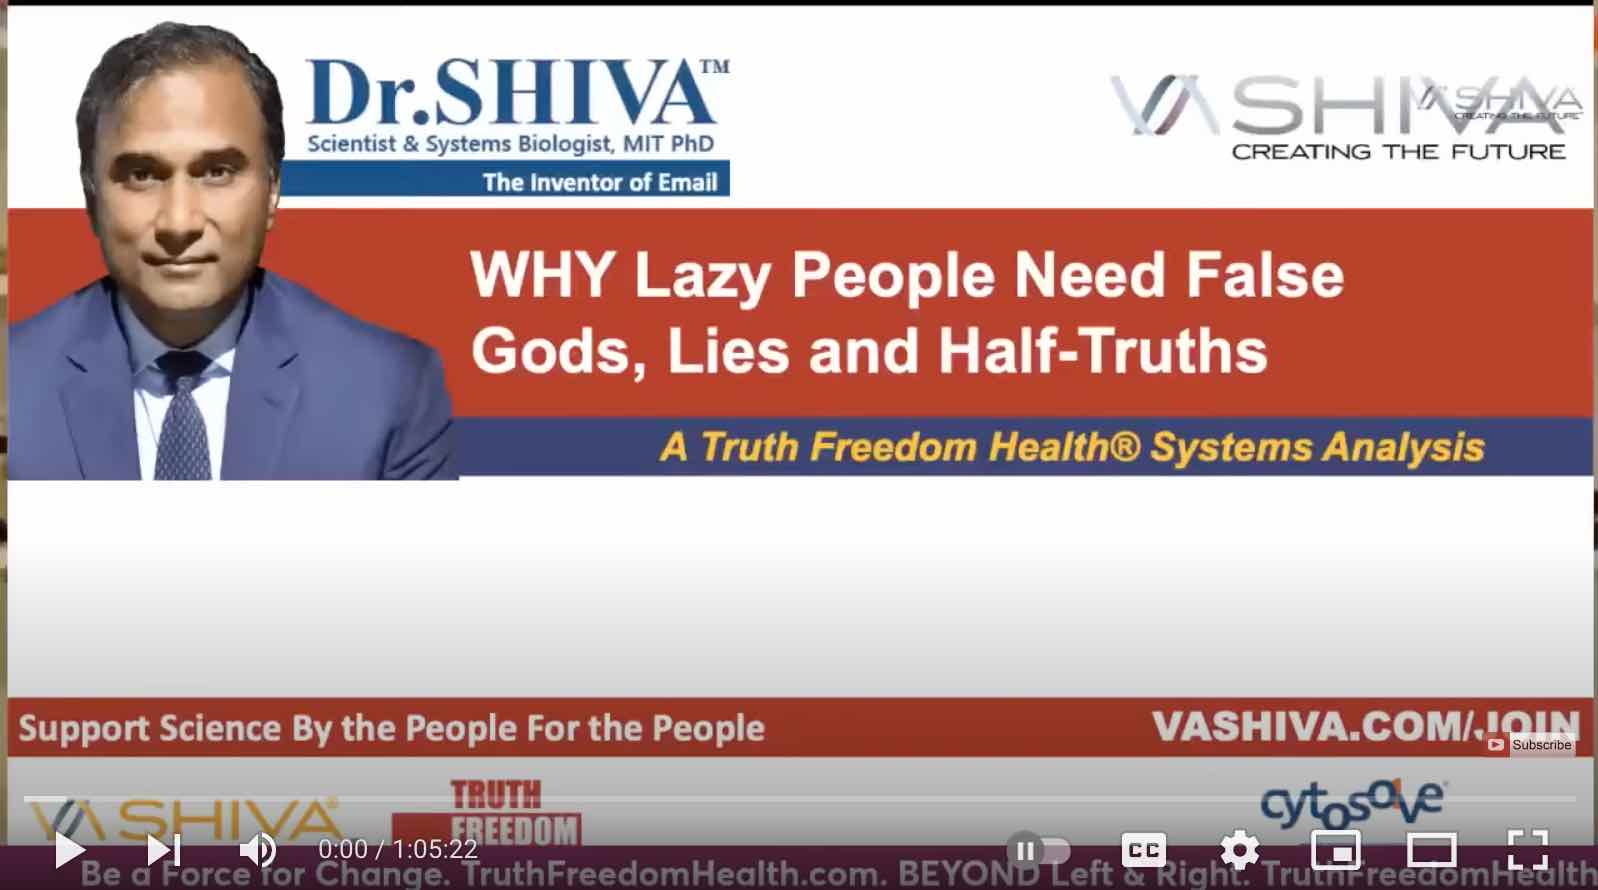 Dr.SHIVA LIVE: This is WHY Lazy People Need False Gods, Lies and Half-Truths. A SYSTEMS ANALYSIS.